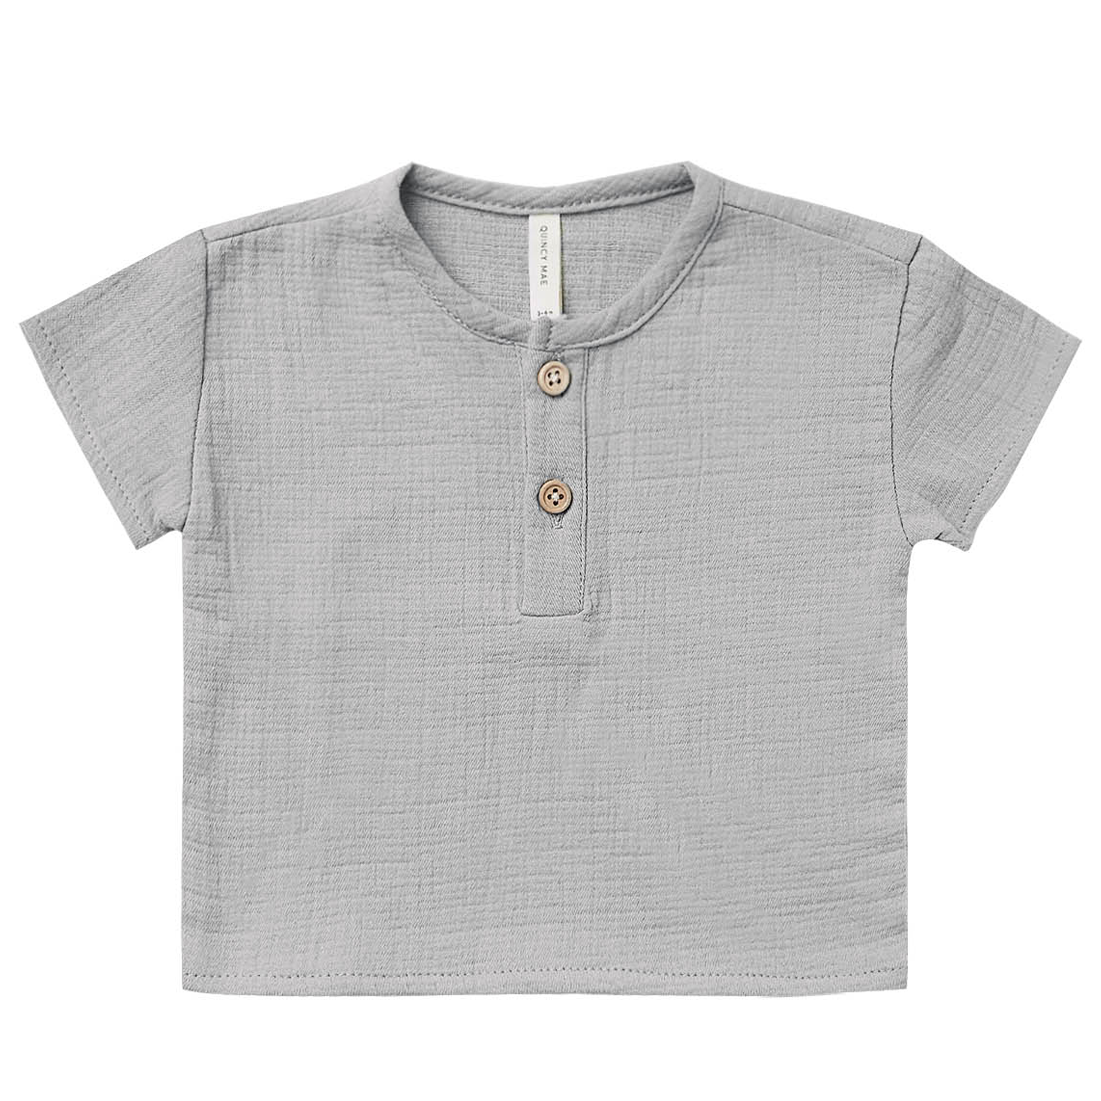 SpearmintLOVE’s baby Woven Henry Top, Periwinkle